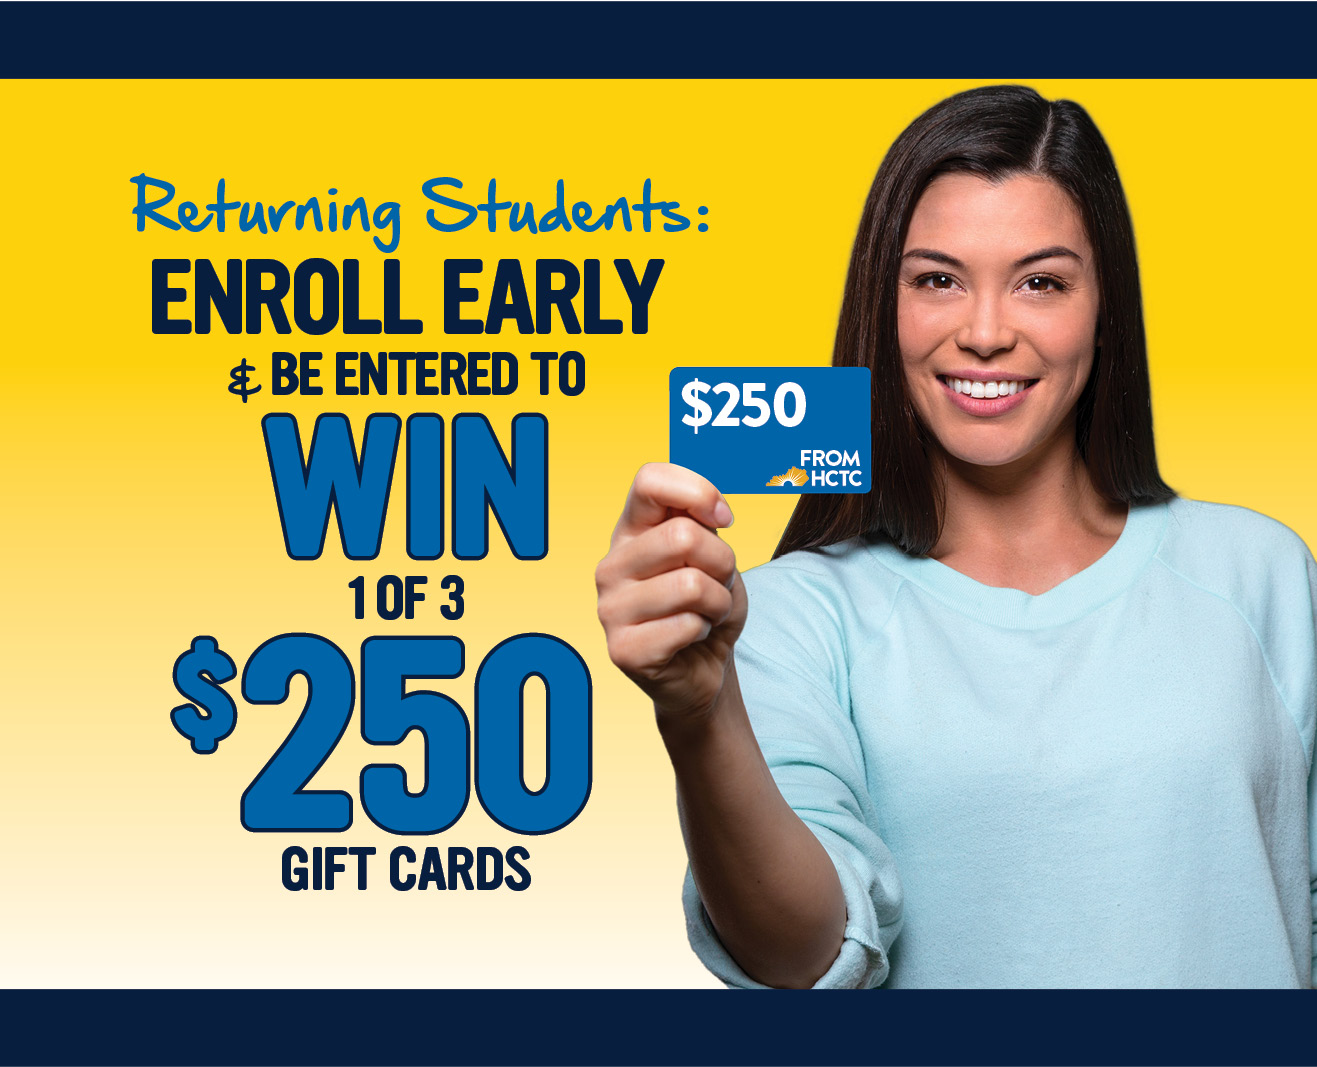 enroll early and be entered to win 1 of 3 $250 Gift Cards